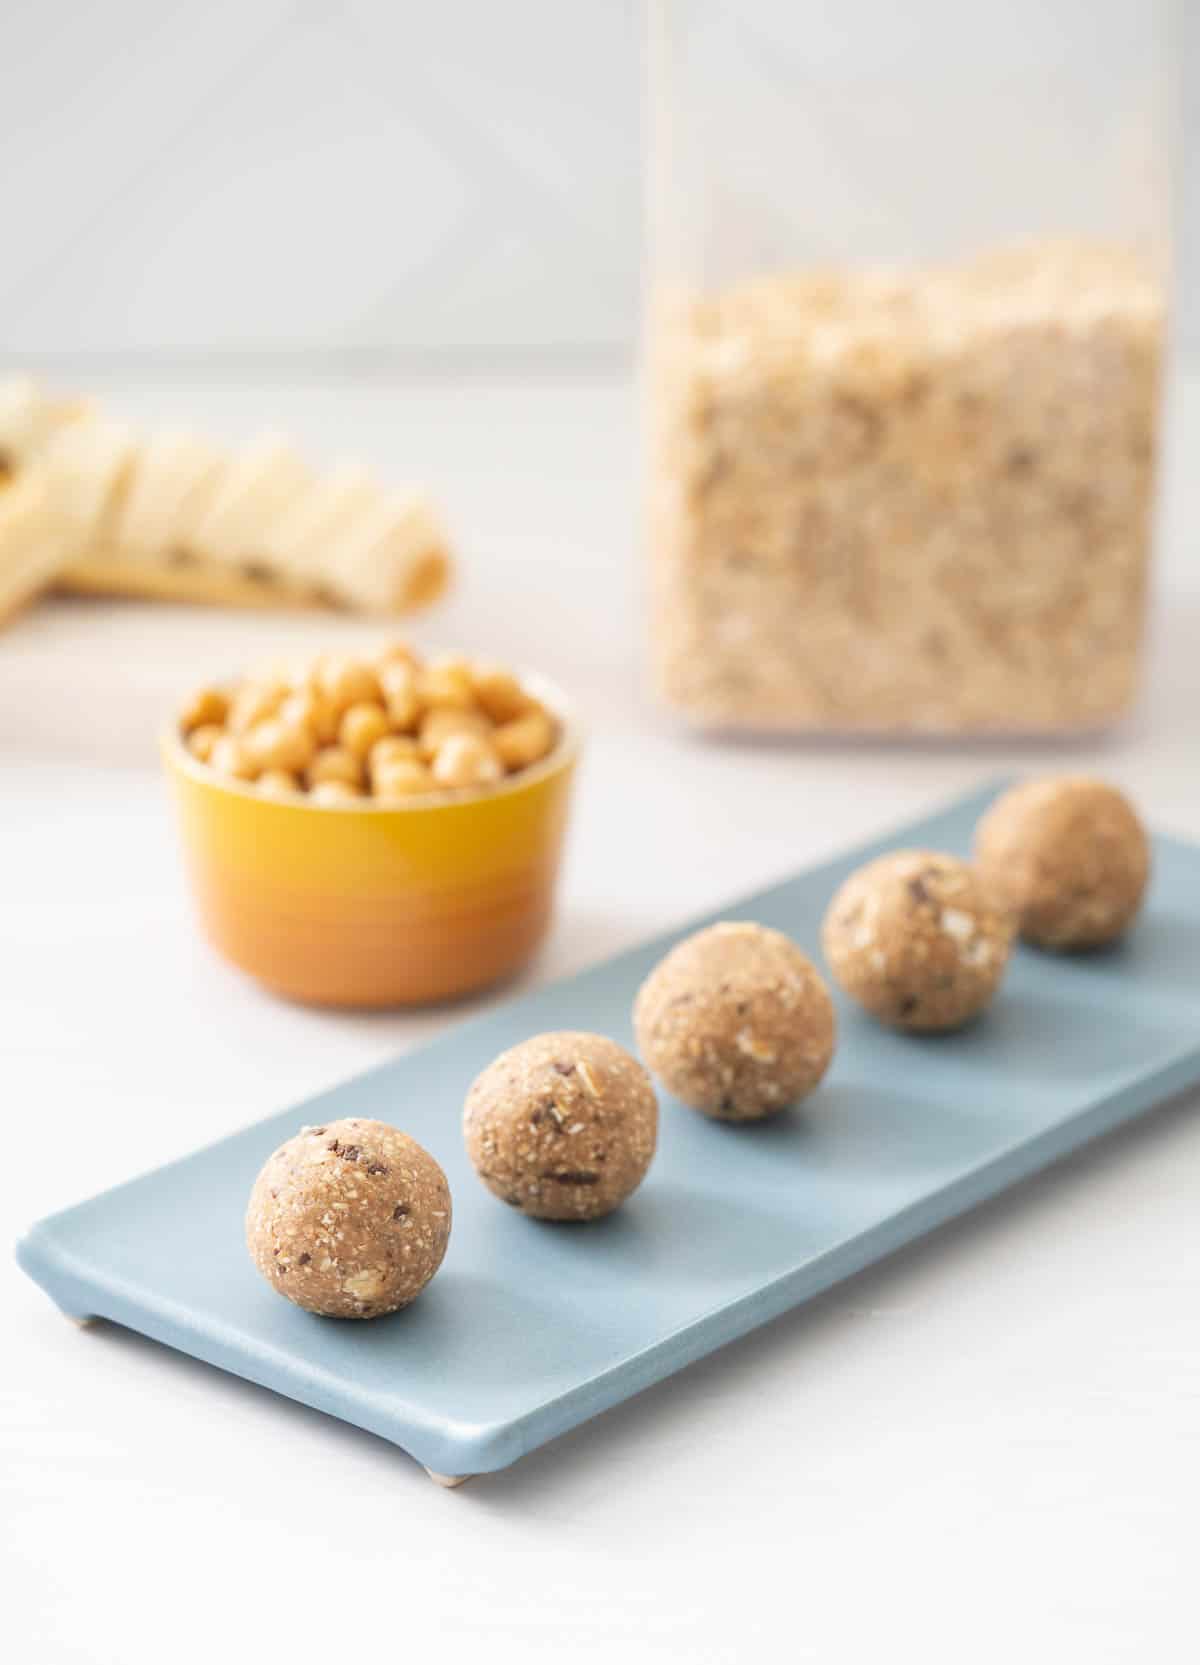 Bliss balls lined up on a small blue plate with a bowl of chickpeas and a large container of rolled oats in the background.